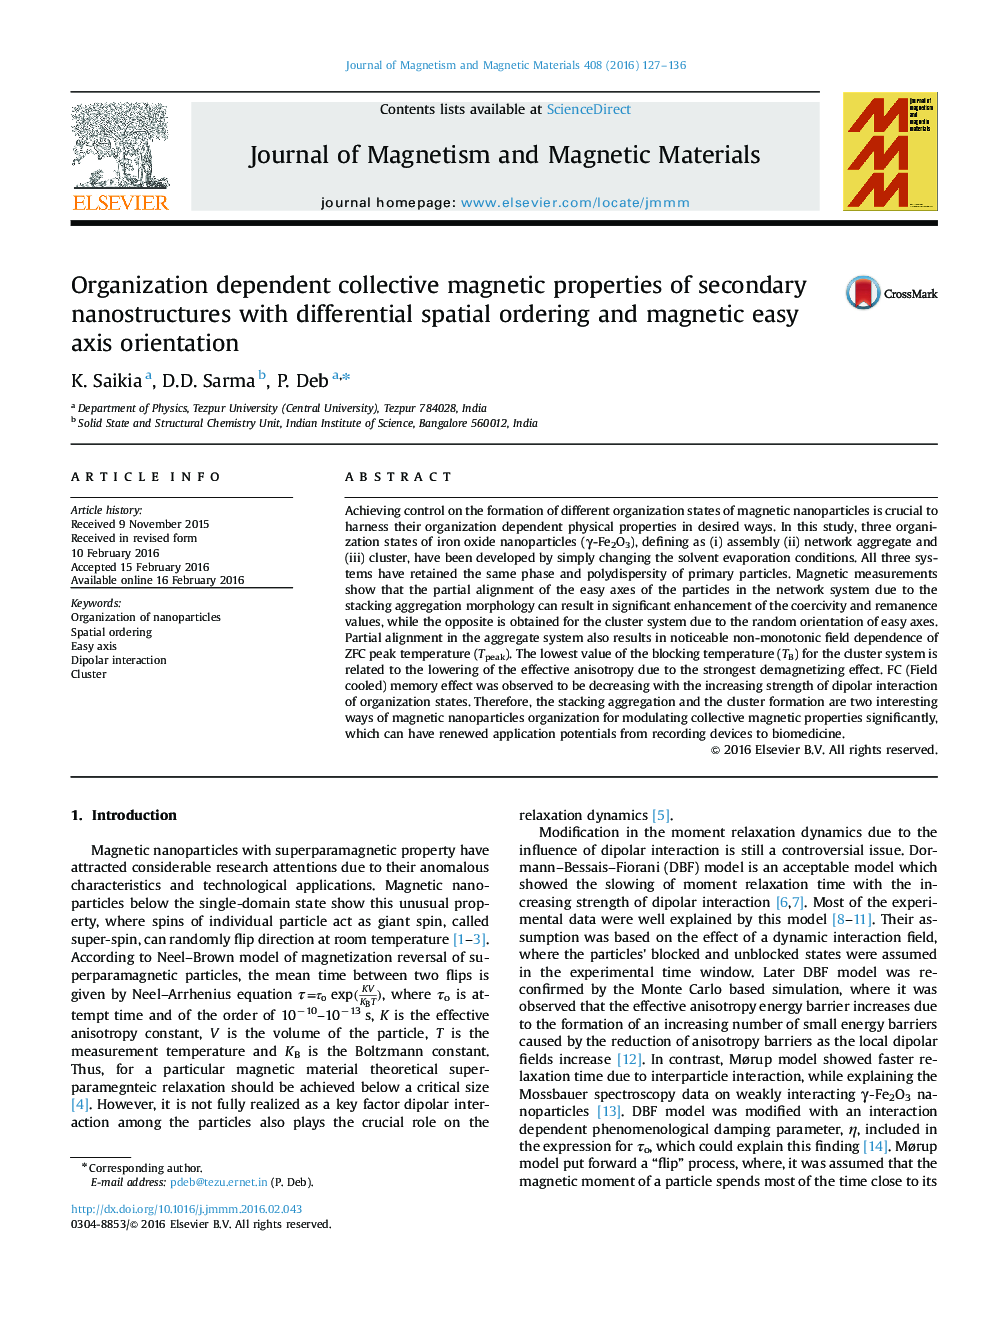 Organization dependent collective magnetic properties of secondary nanostructures with differential spatial ordering and magnetic easy axis orientation